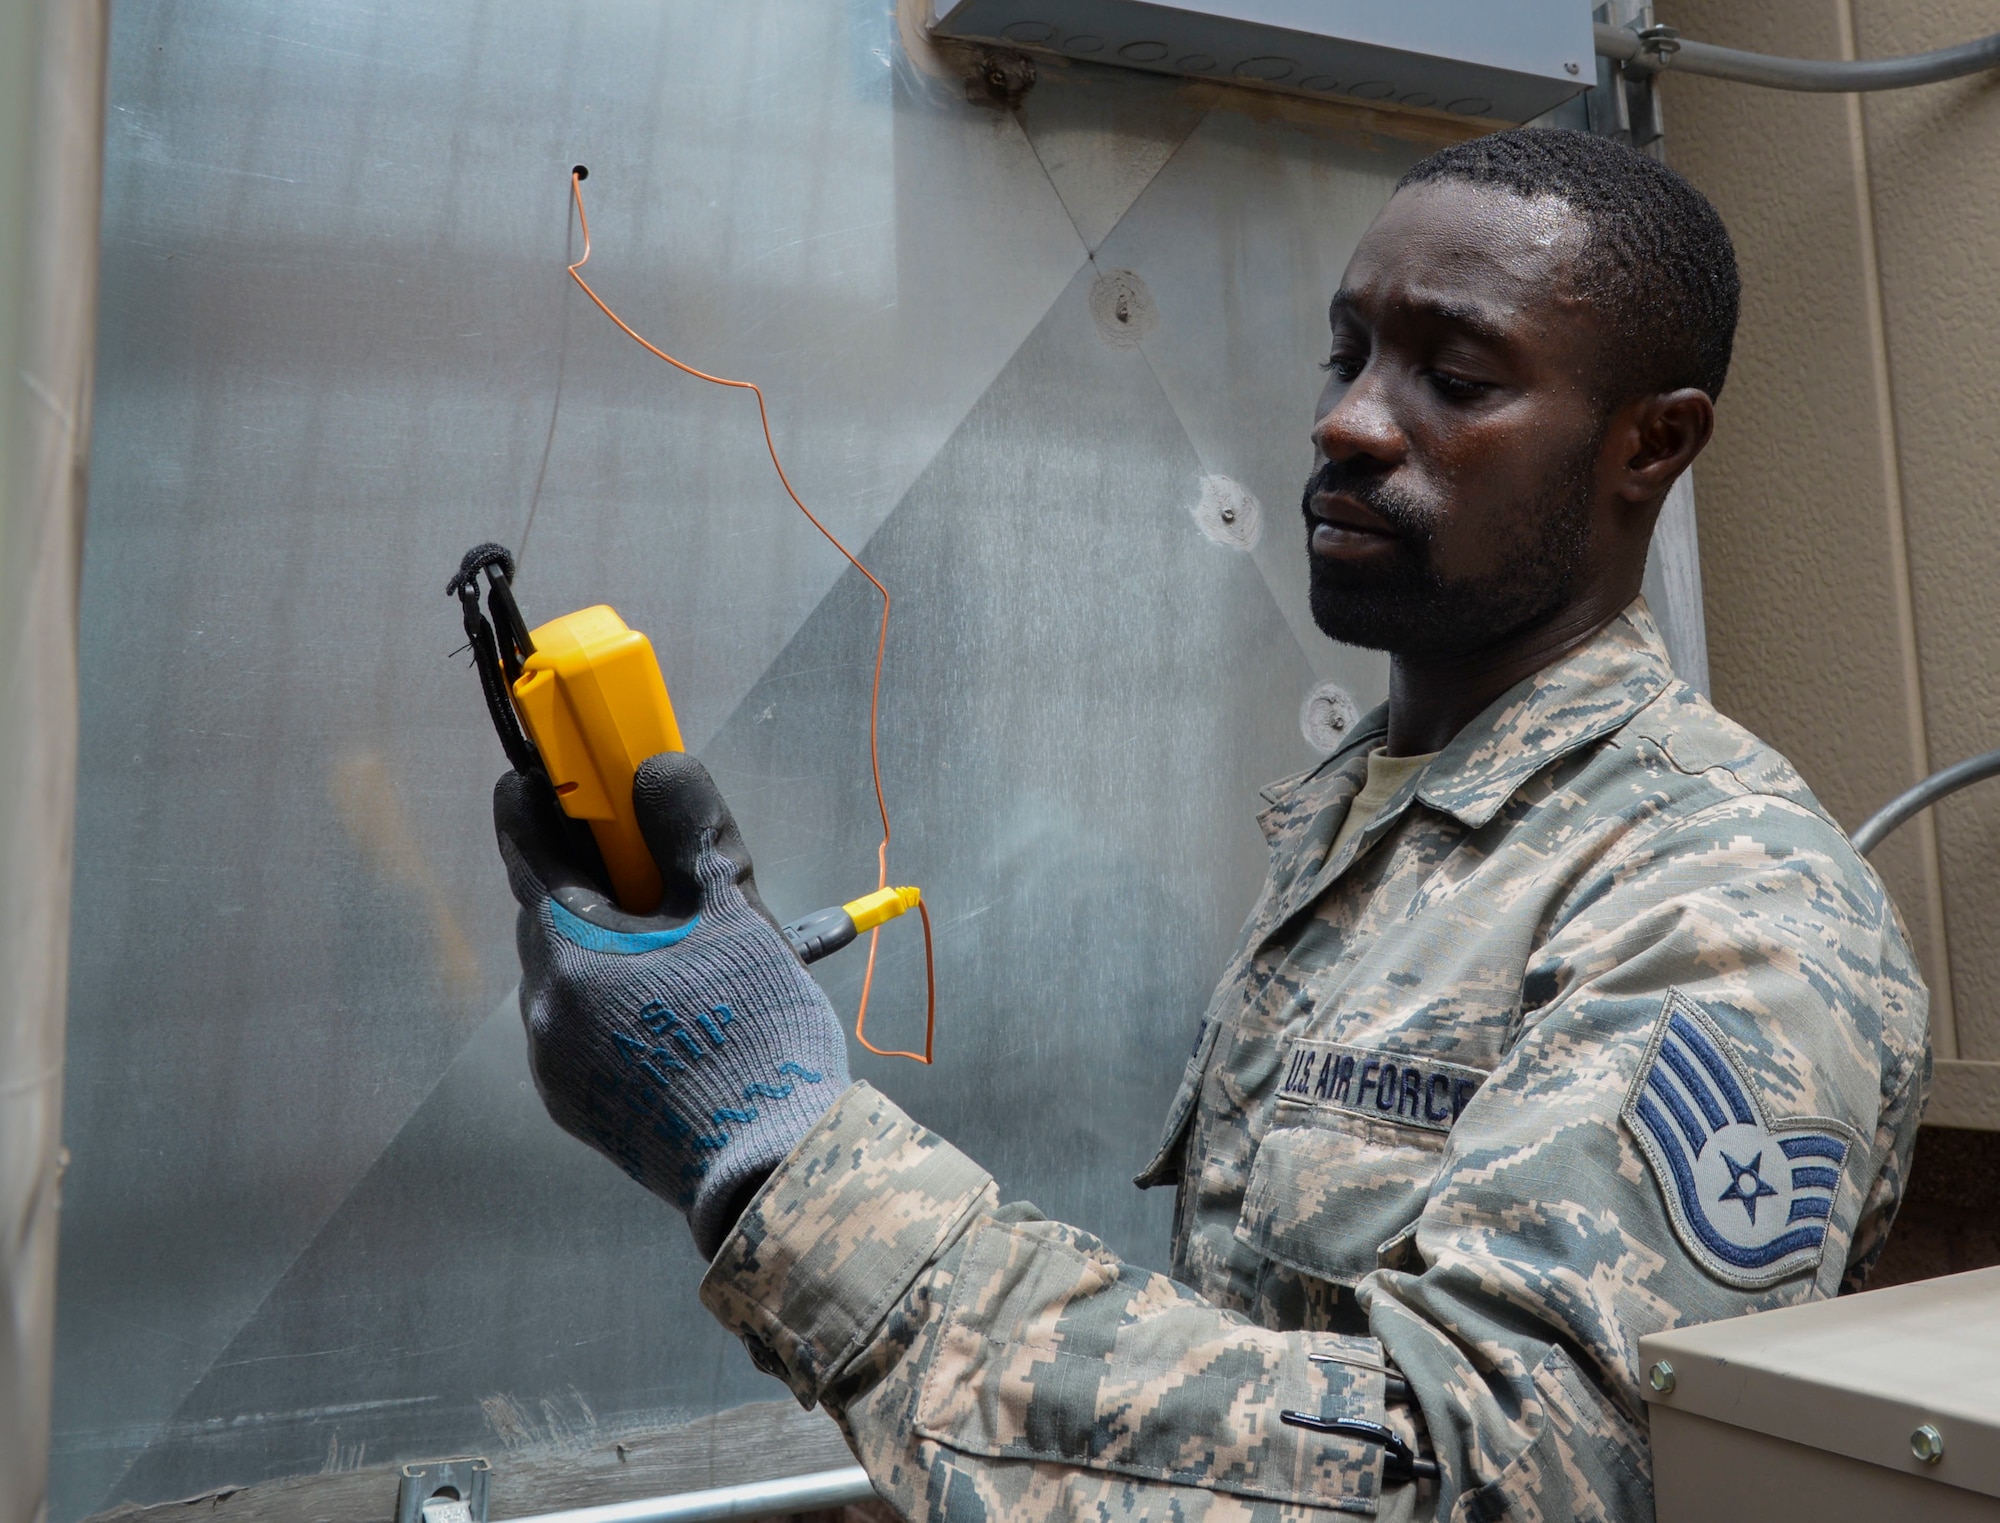 Staff Sgt. Cheick Kamagate, Heating, Ventilation, Air Conditioning/Refrigeration and Control technician assigned to the 512th Civil Engineer Squadron Reserve Unit at Dover Air Force Base, Delaware checks the air supply temperature going into a 57th maintenance facility on Nellis Air Force Base. The 99th CES HVAC shop has prepared for the summer heat by utilizing over 50 Air Reserve Component technicians across 13 other bases. (U.S. Air Force photo by Airman Bailee A. Darbasie)